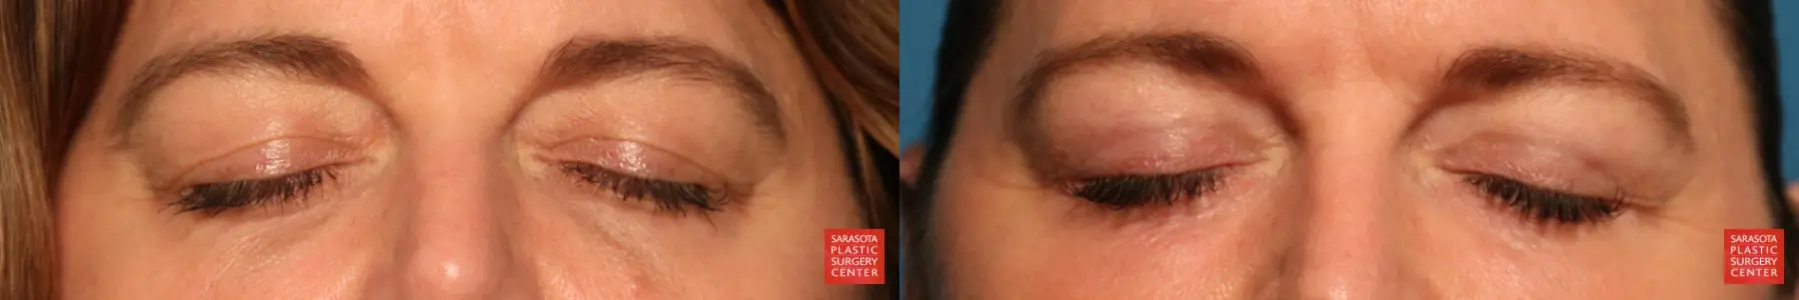 Eyelid Lift: Patient 5 - Before and After 2